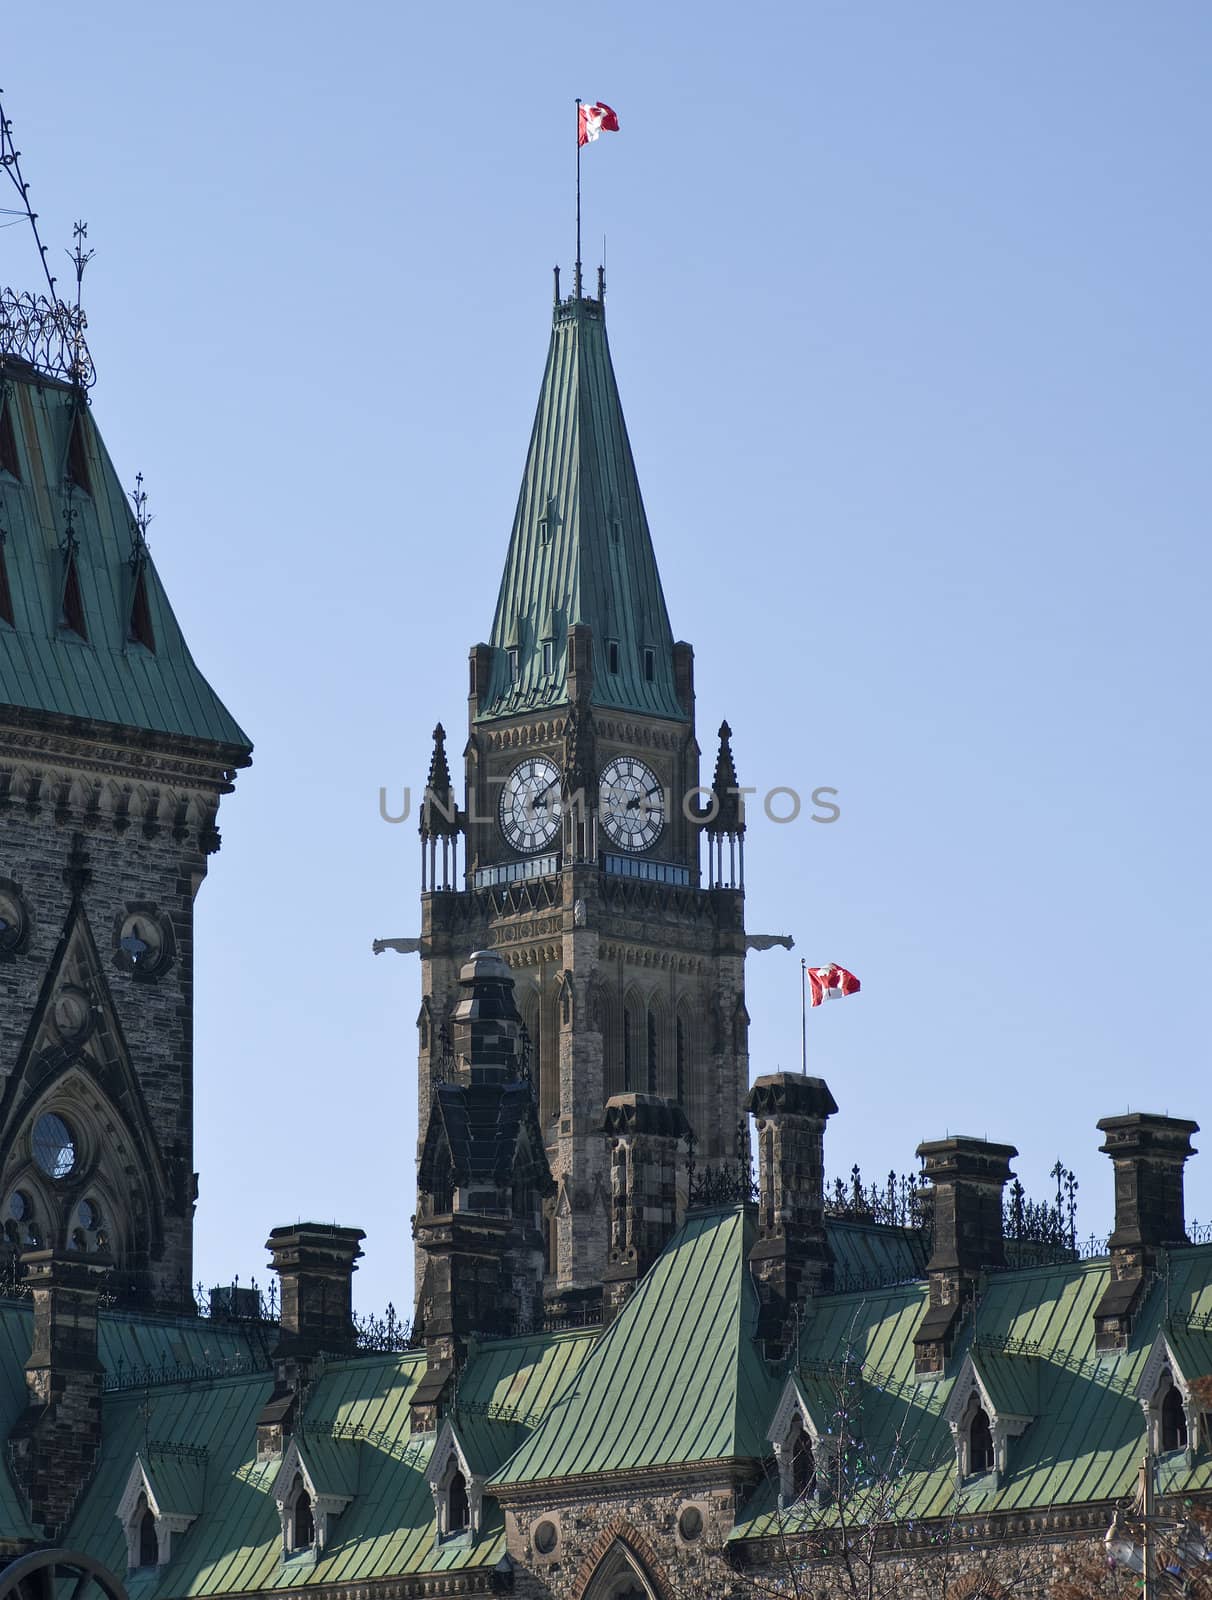 The Canadian Parliemant behind the East Block roof.